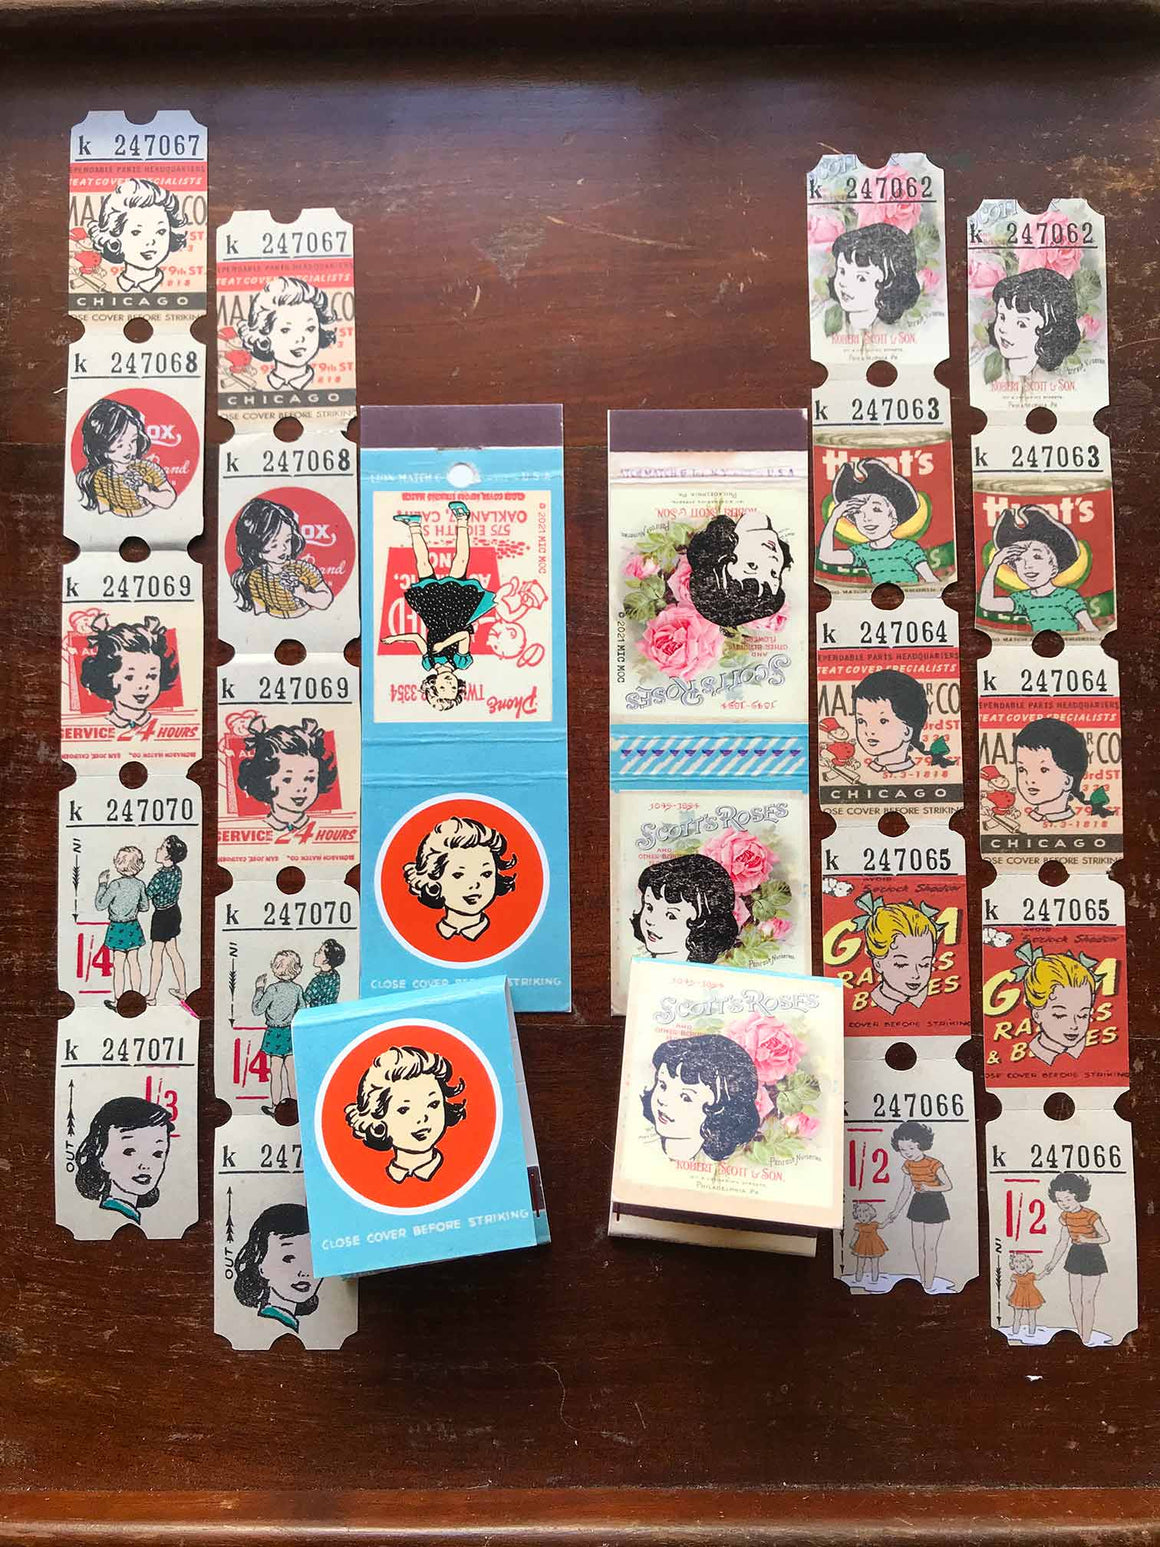 Altered Vintage Matchbook Set B: ‘Red Spot & Roses’  from micmoc.com at Mic Moc ブックマッチ共ヴィンテージチケット